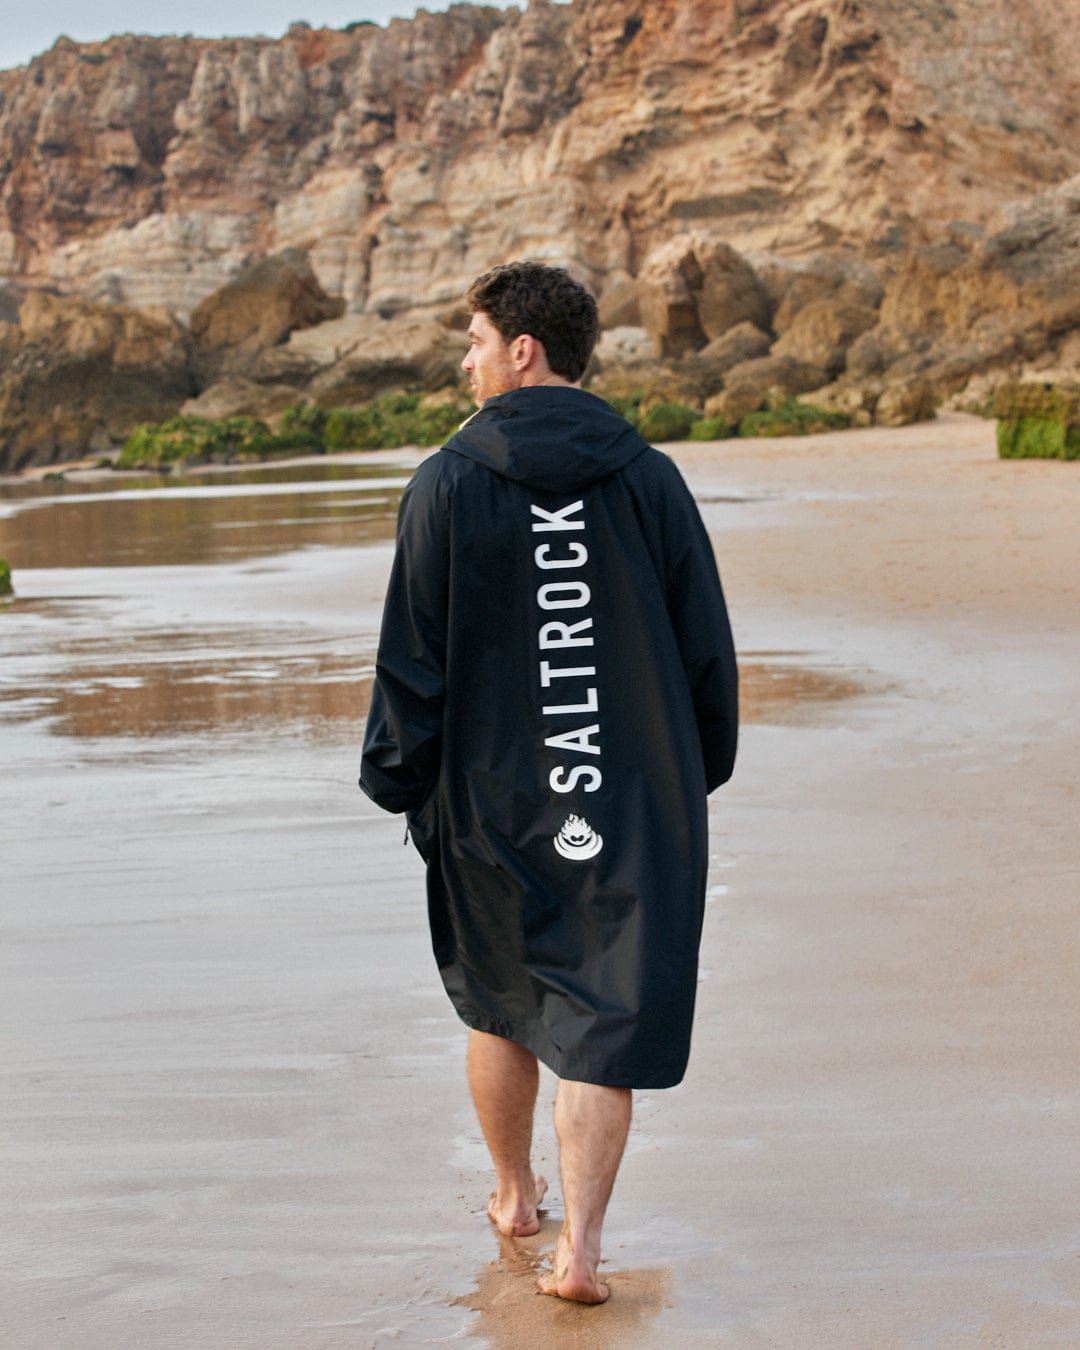 Man in a Saltrock-branded 3 in 1 Recycled Four Seasons Changing Robe - Black/Yellow walking on a sandy beach with rocky cliffs in the background.